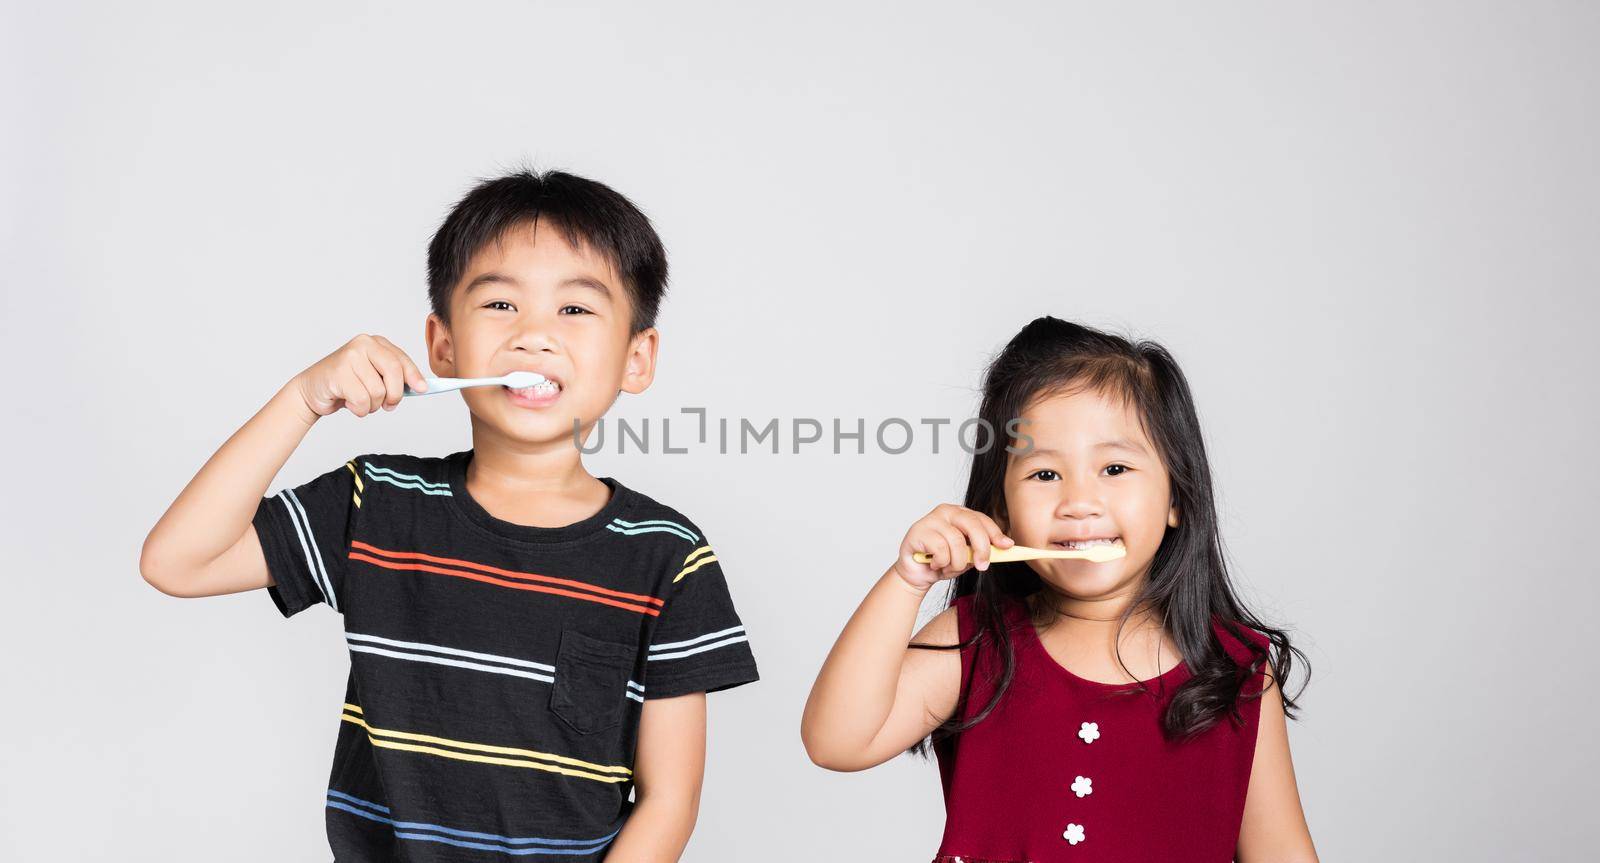 Little cute kid boy and girl 3-6 years old brushing teeth and smile in studio shot isolated on white background, happy Asian children holding toothbrush in mouth by himself, Dental hygiene healthy